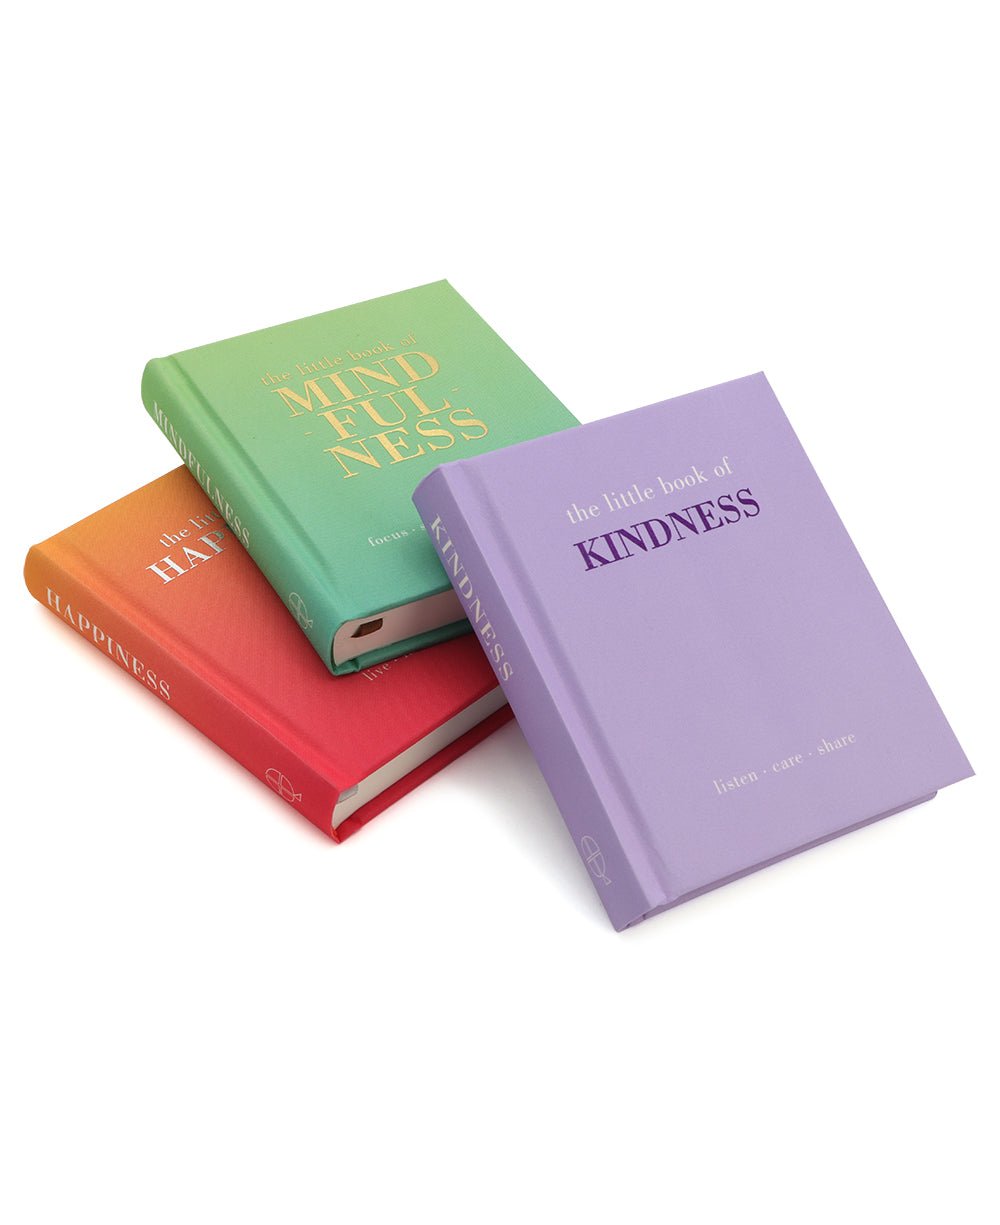 Set of 3, Little Book of Kindness, Mindfulness, and Happiness - Books